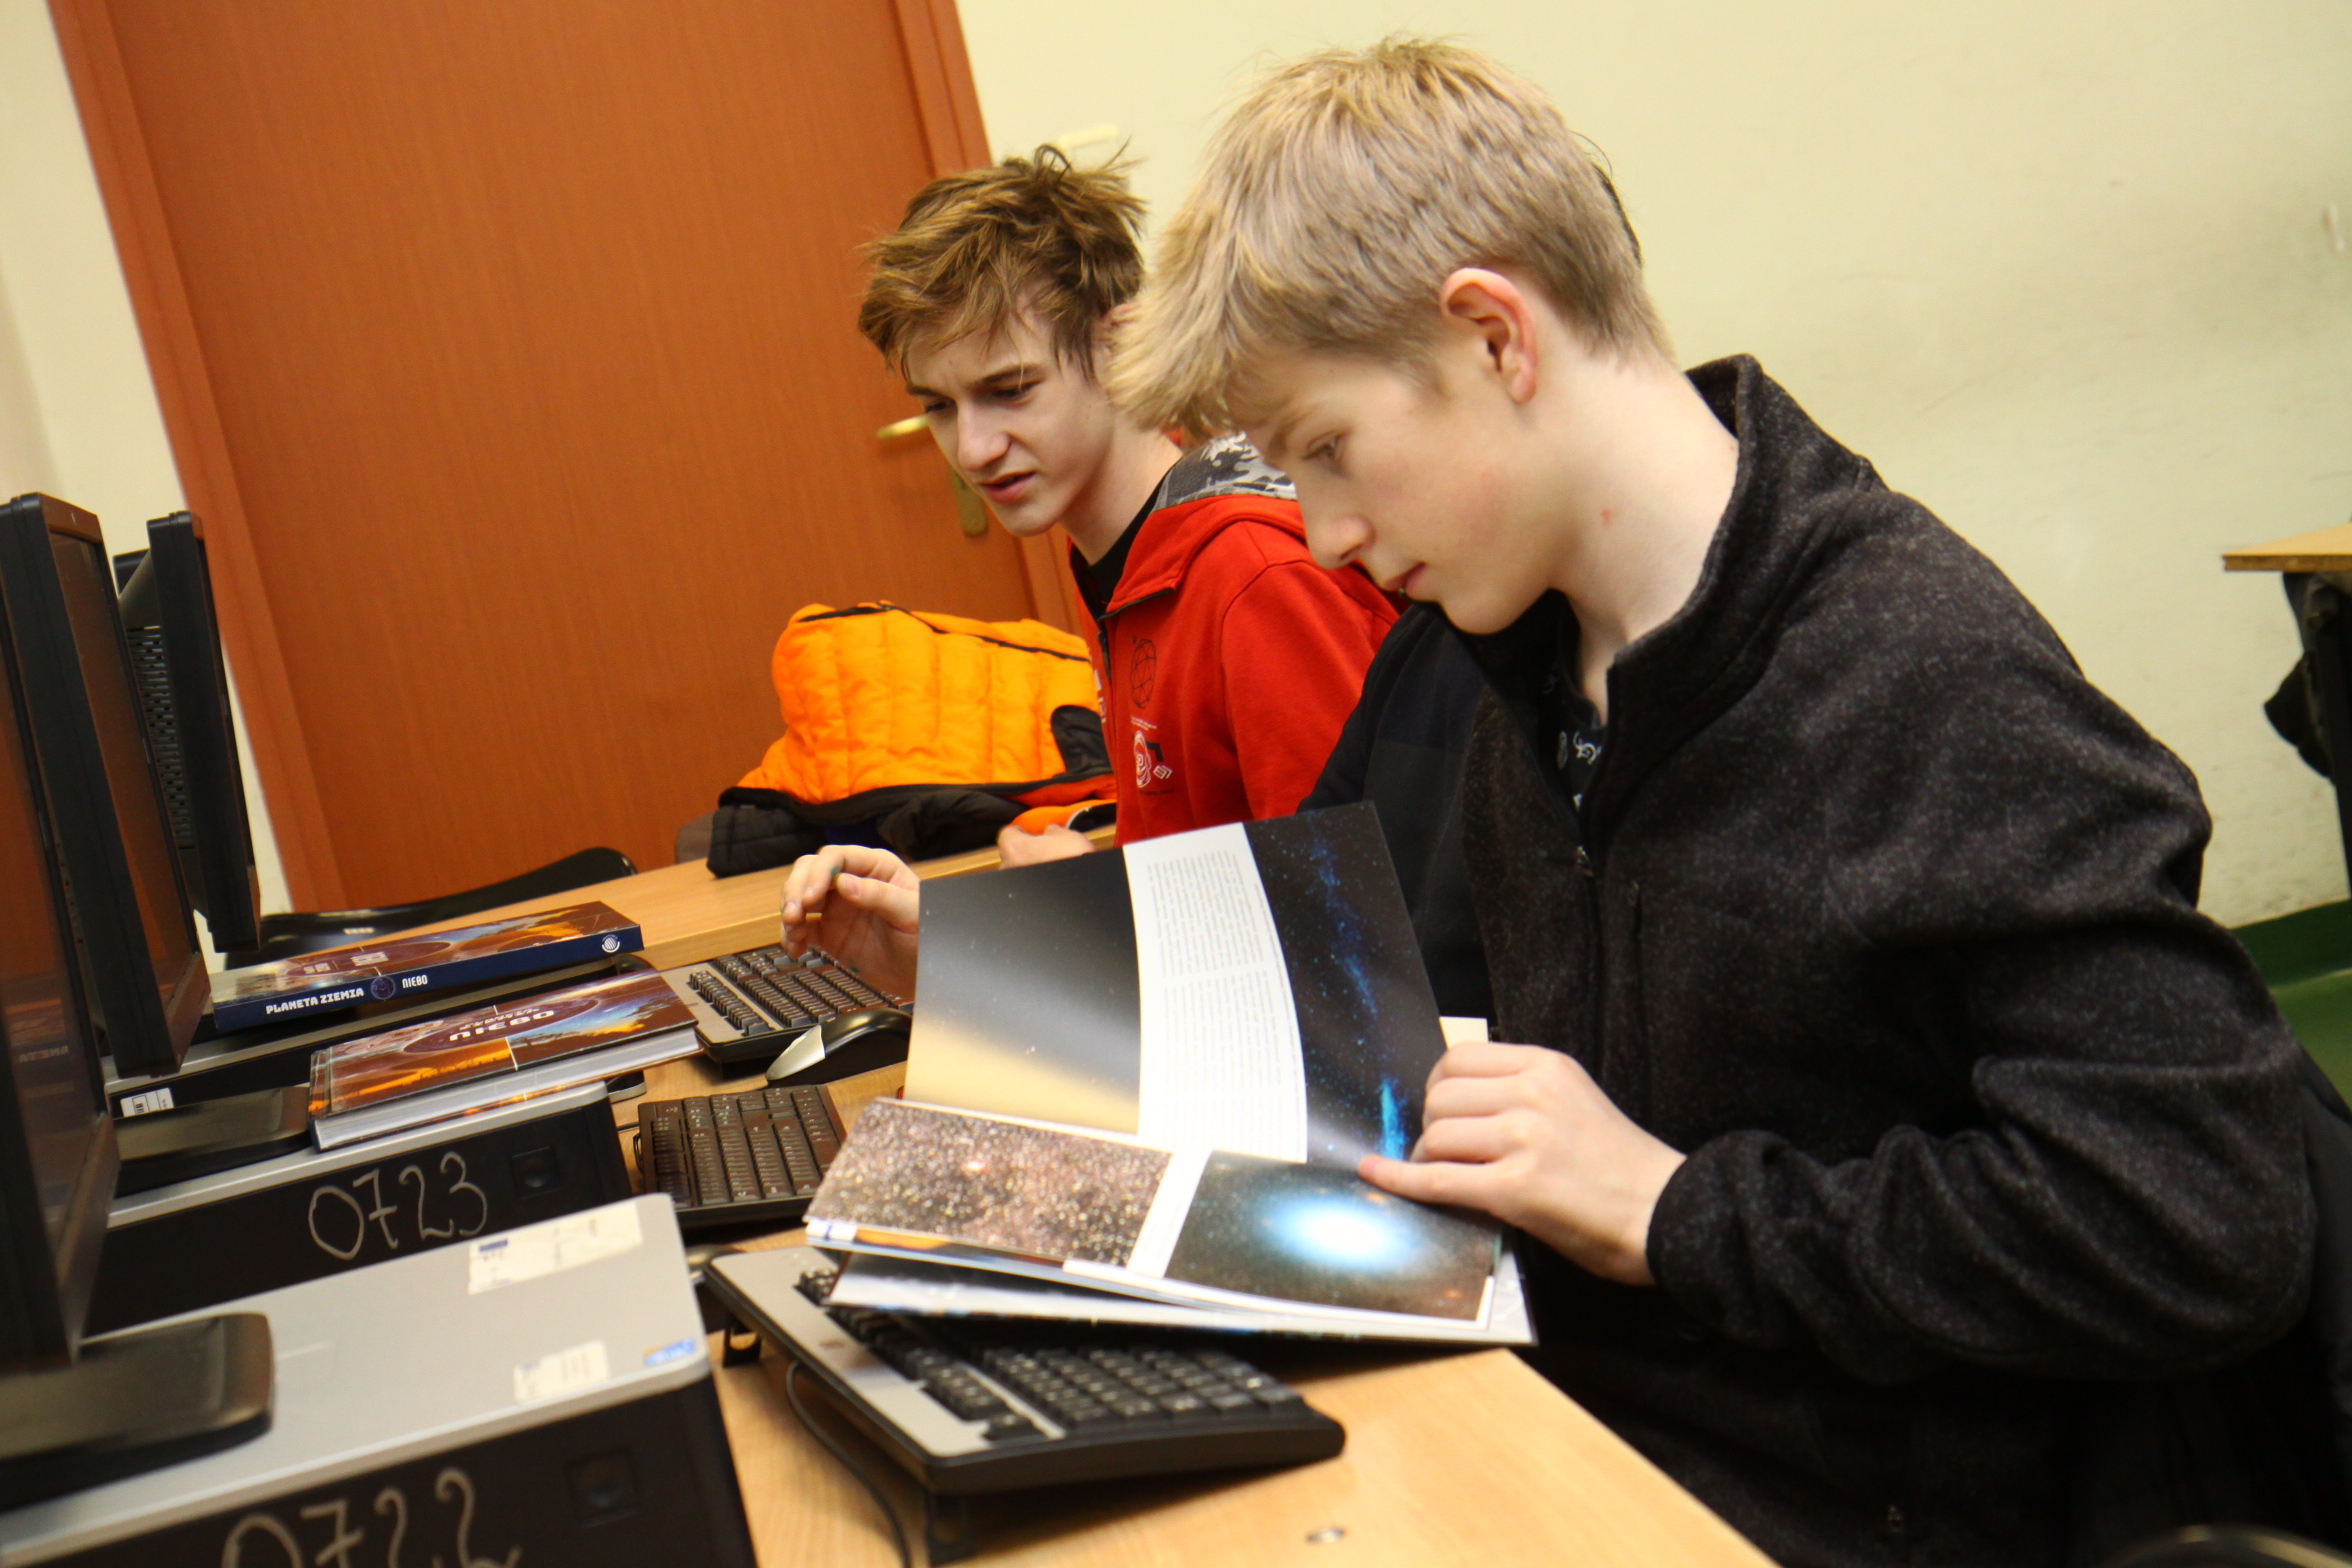 Students during a web development course in the studio